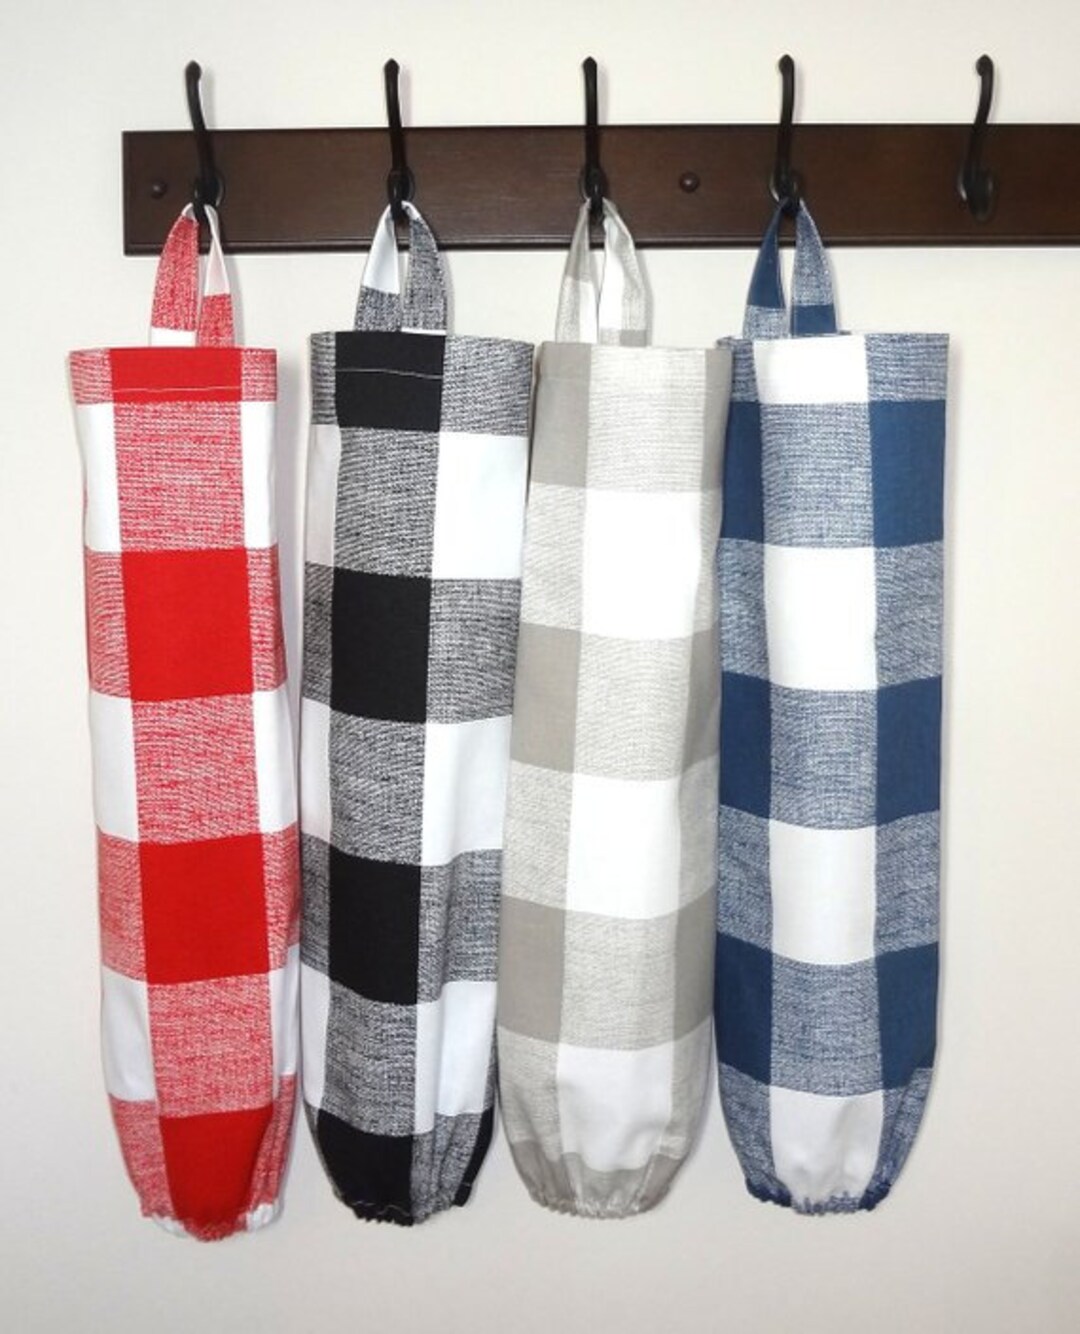 Weewooday 6 Pieces Cotton Plaid Drawstring Bag Stocking Storage Sack  Present Xmas Bags Party Favors Bags (Red and Black Plaid)